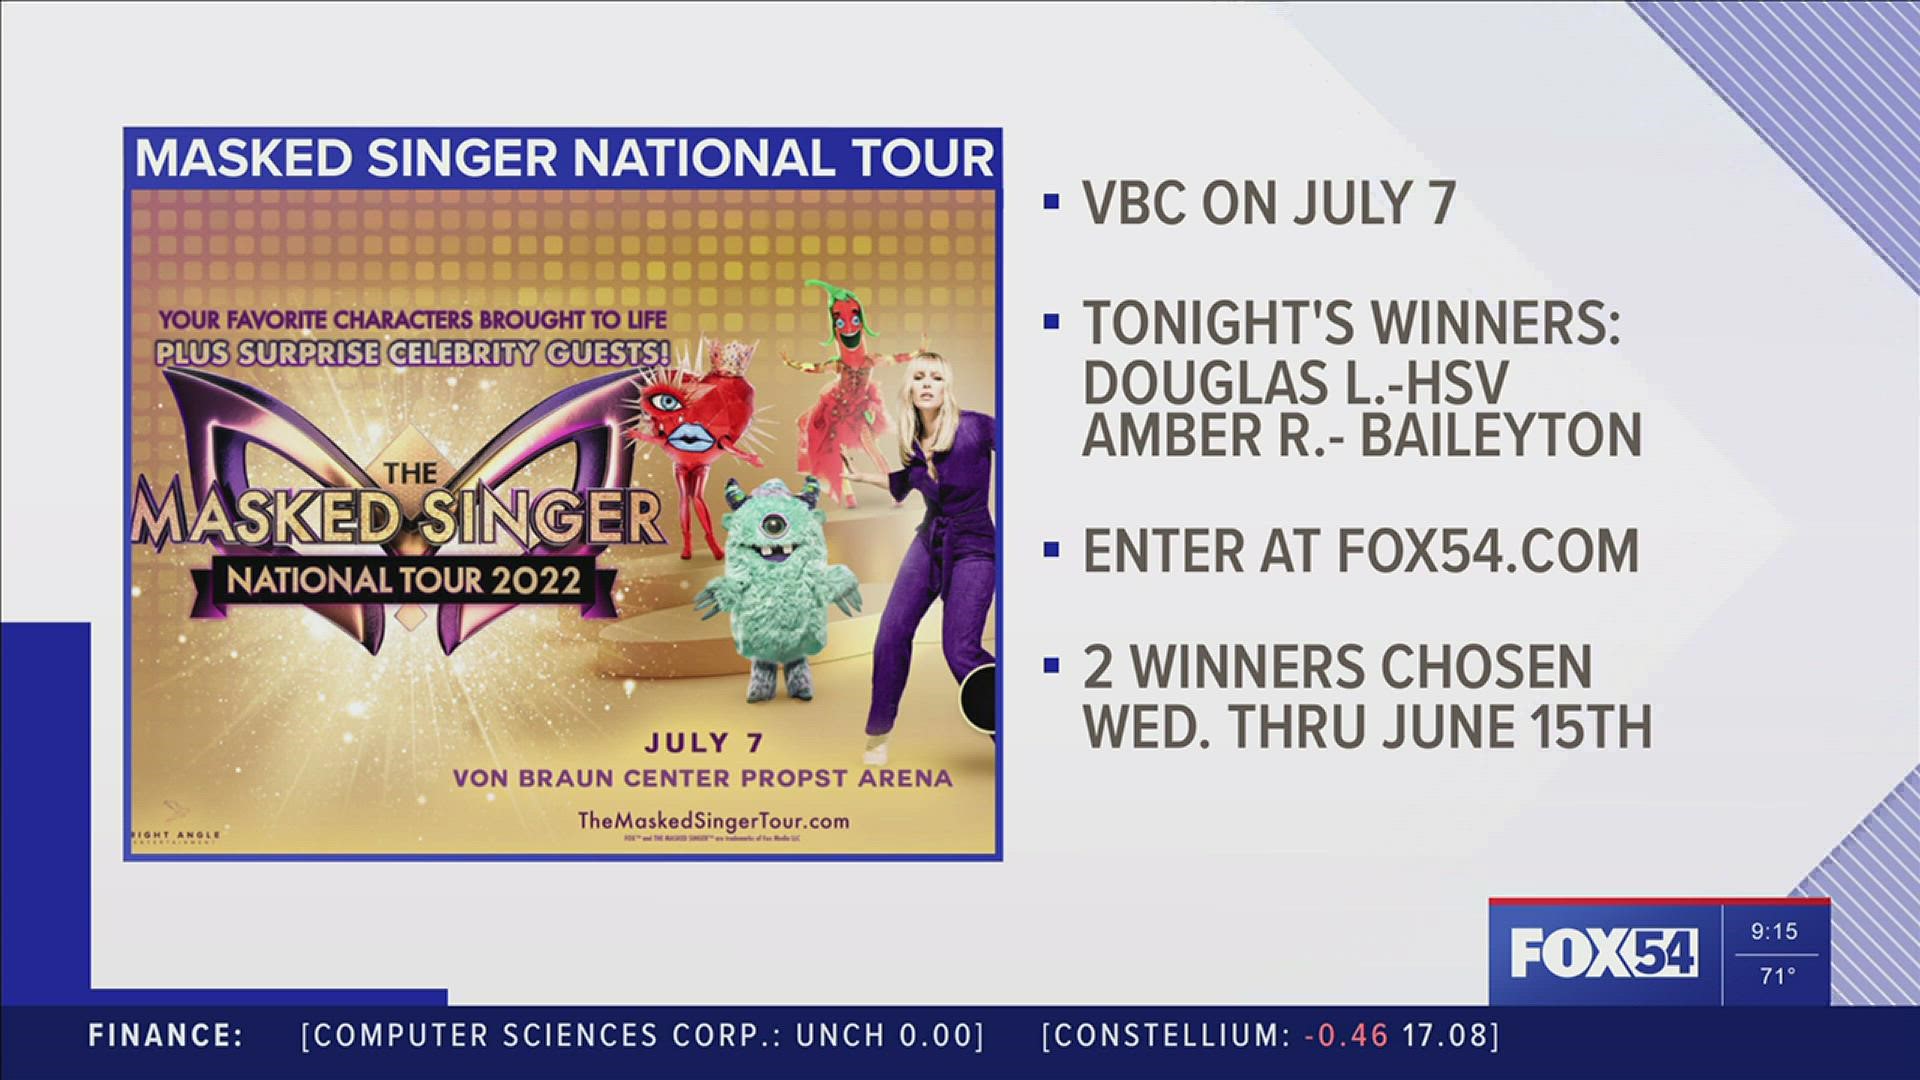 If you want to win, just head over to FOX54.com and enter. We will choose two winners every Wednesday through June 15th.